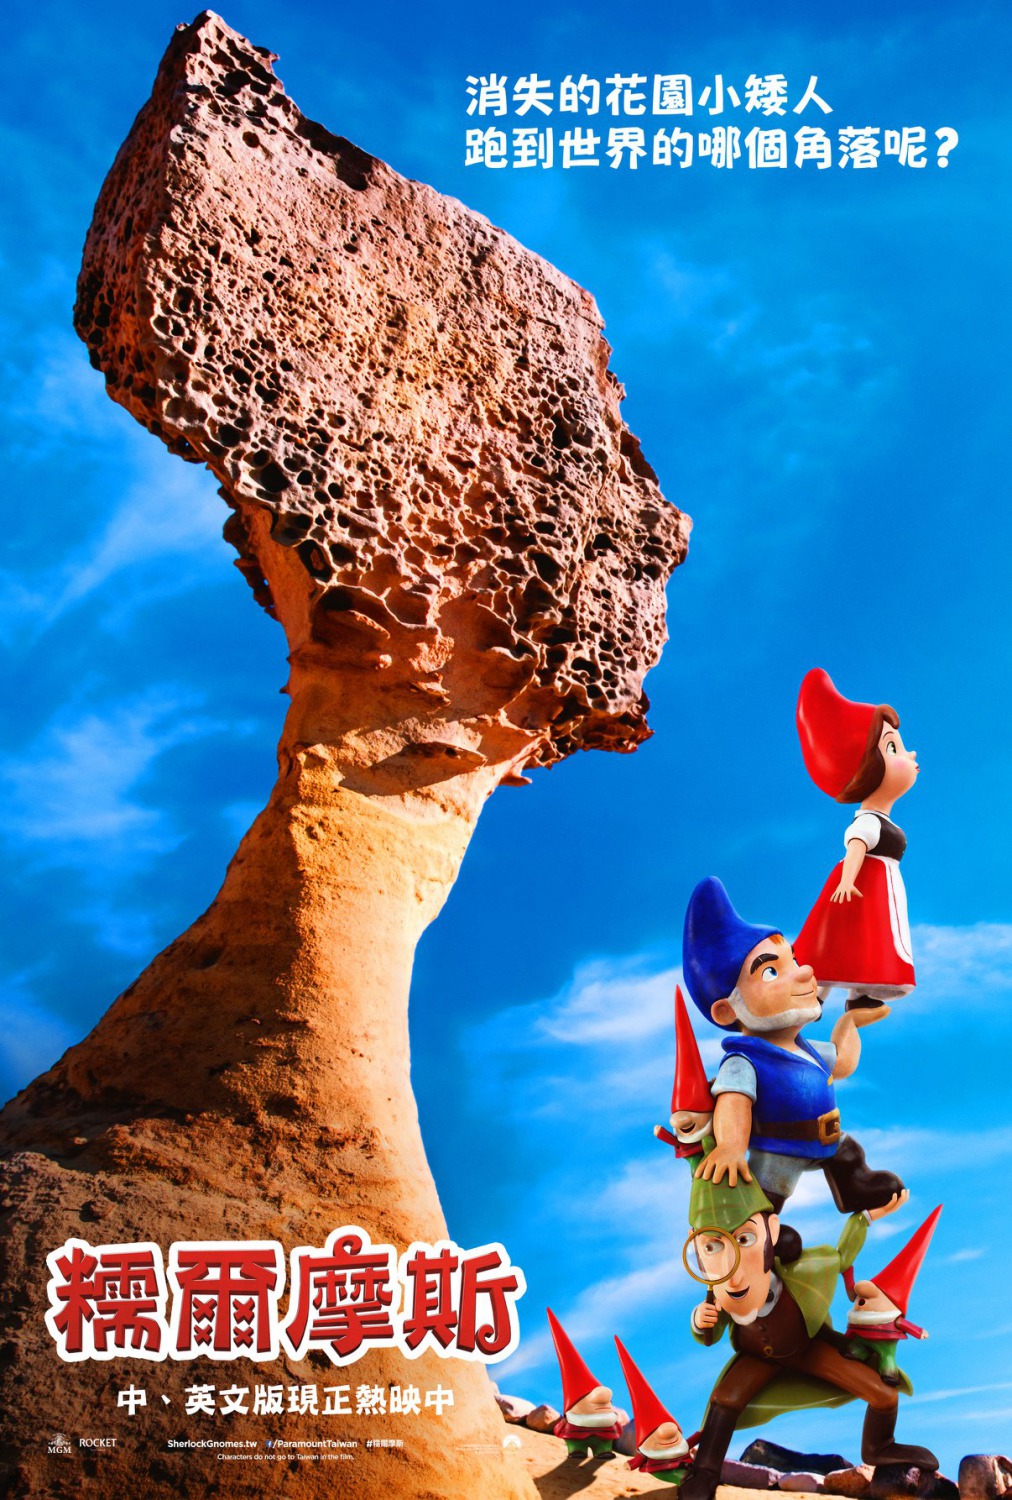 Extra Large Movie Poster Image for Gnomeo & Juliet: Sherlock Gnomes (#37 of 41)